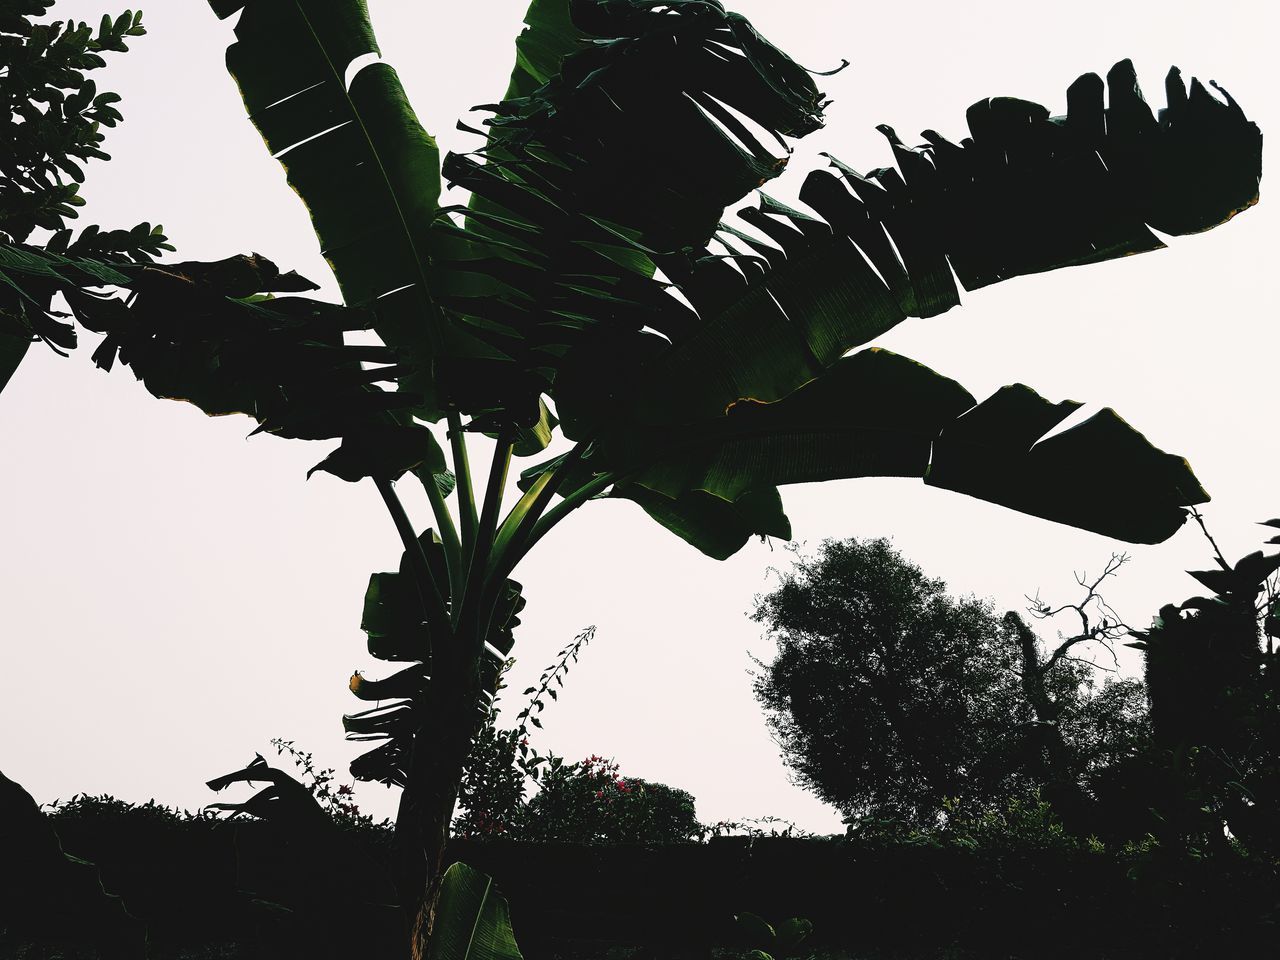 tree, low angle view, leaf, outdoors, clear sky, sky, silhouette, day, no people, growth, nature, banana tree, palm tree